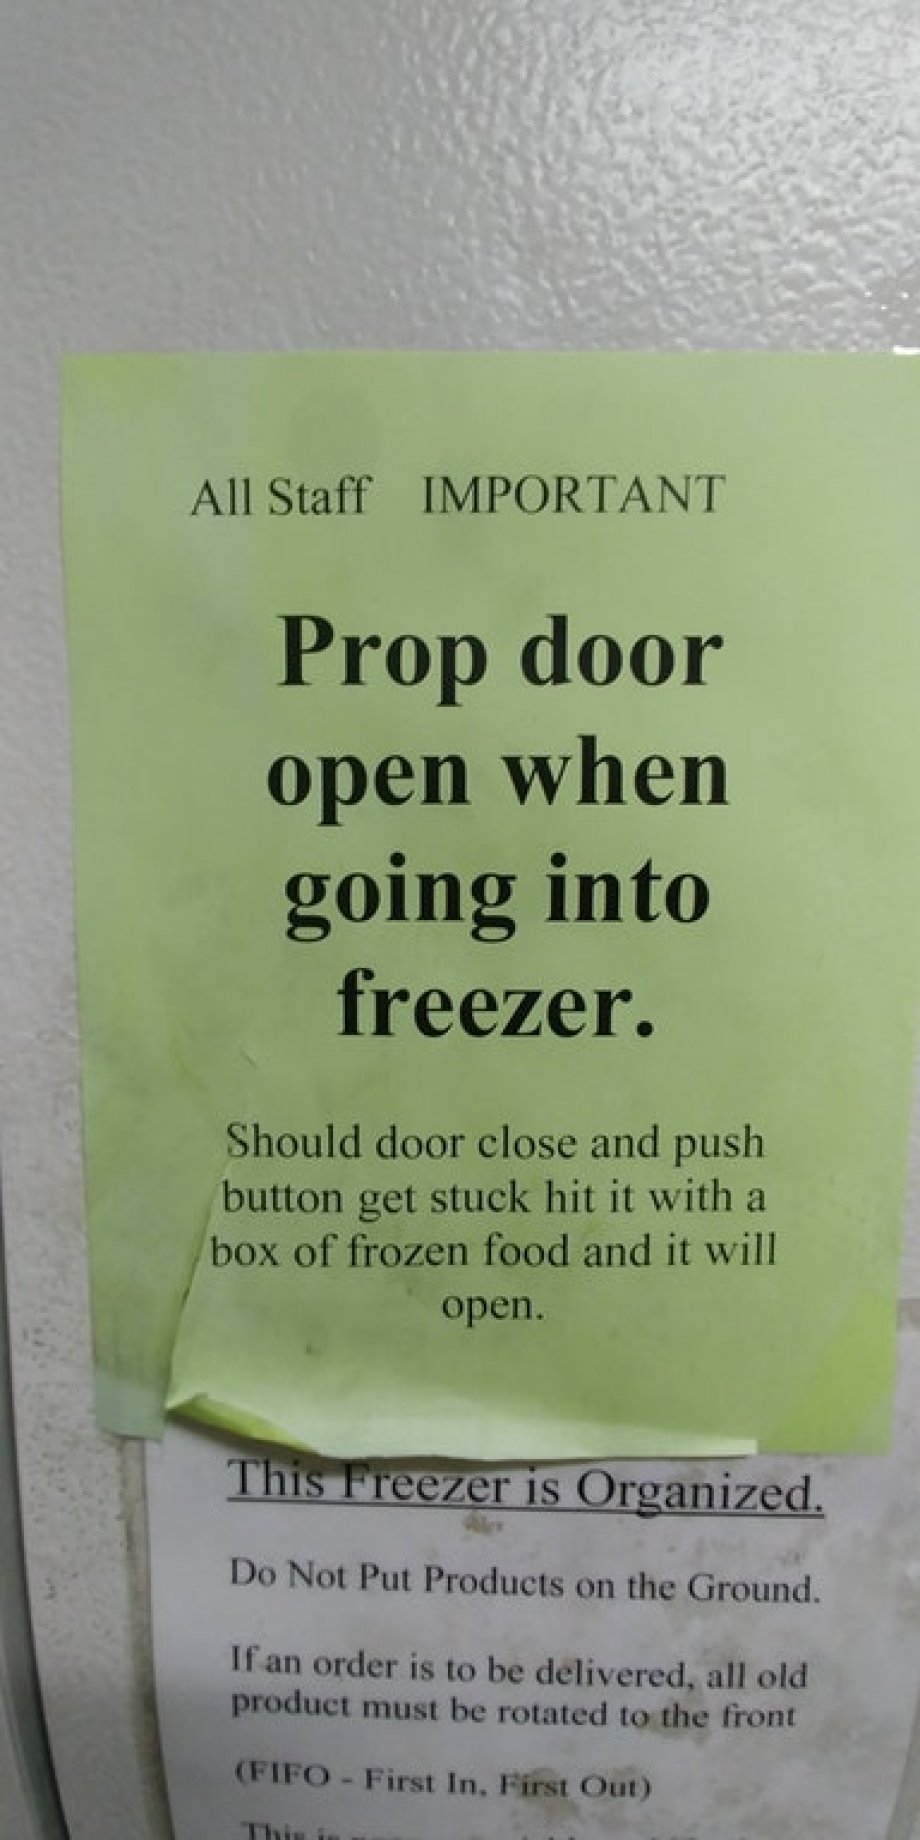 label - All Staff Important Prop door open when going into freezer. Should door close and push button get stuck hit it with a box of frozen food and it will open. This Freezer is Organized. Do Not Put Products on the Ground. If an order is to be delivered